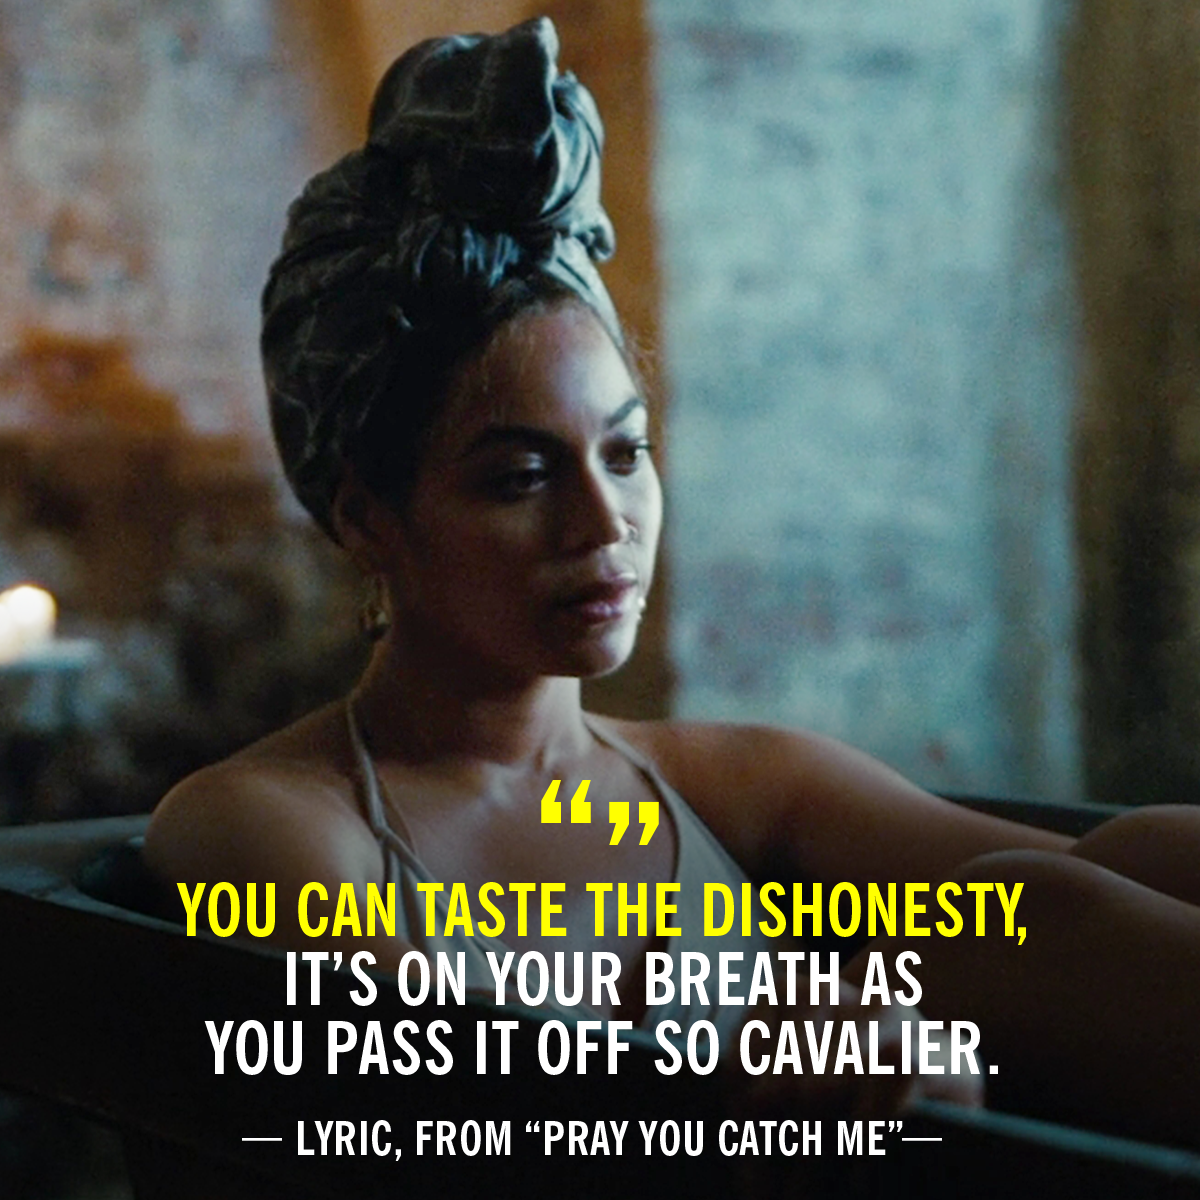 when @beyonce asks you to serve c*nt you listen 🧎🏽‍♀️